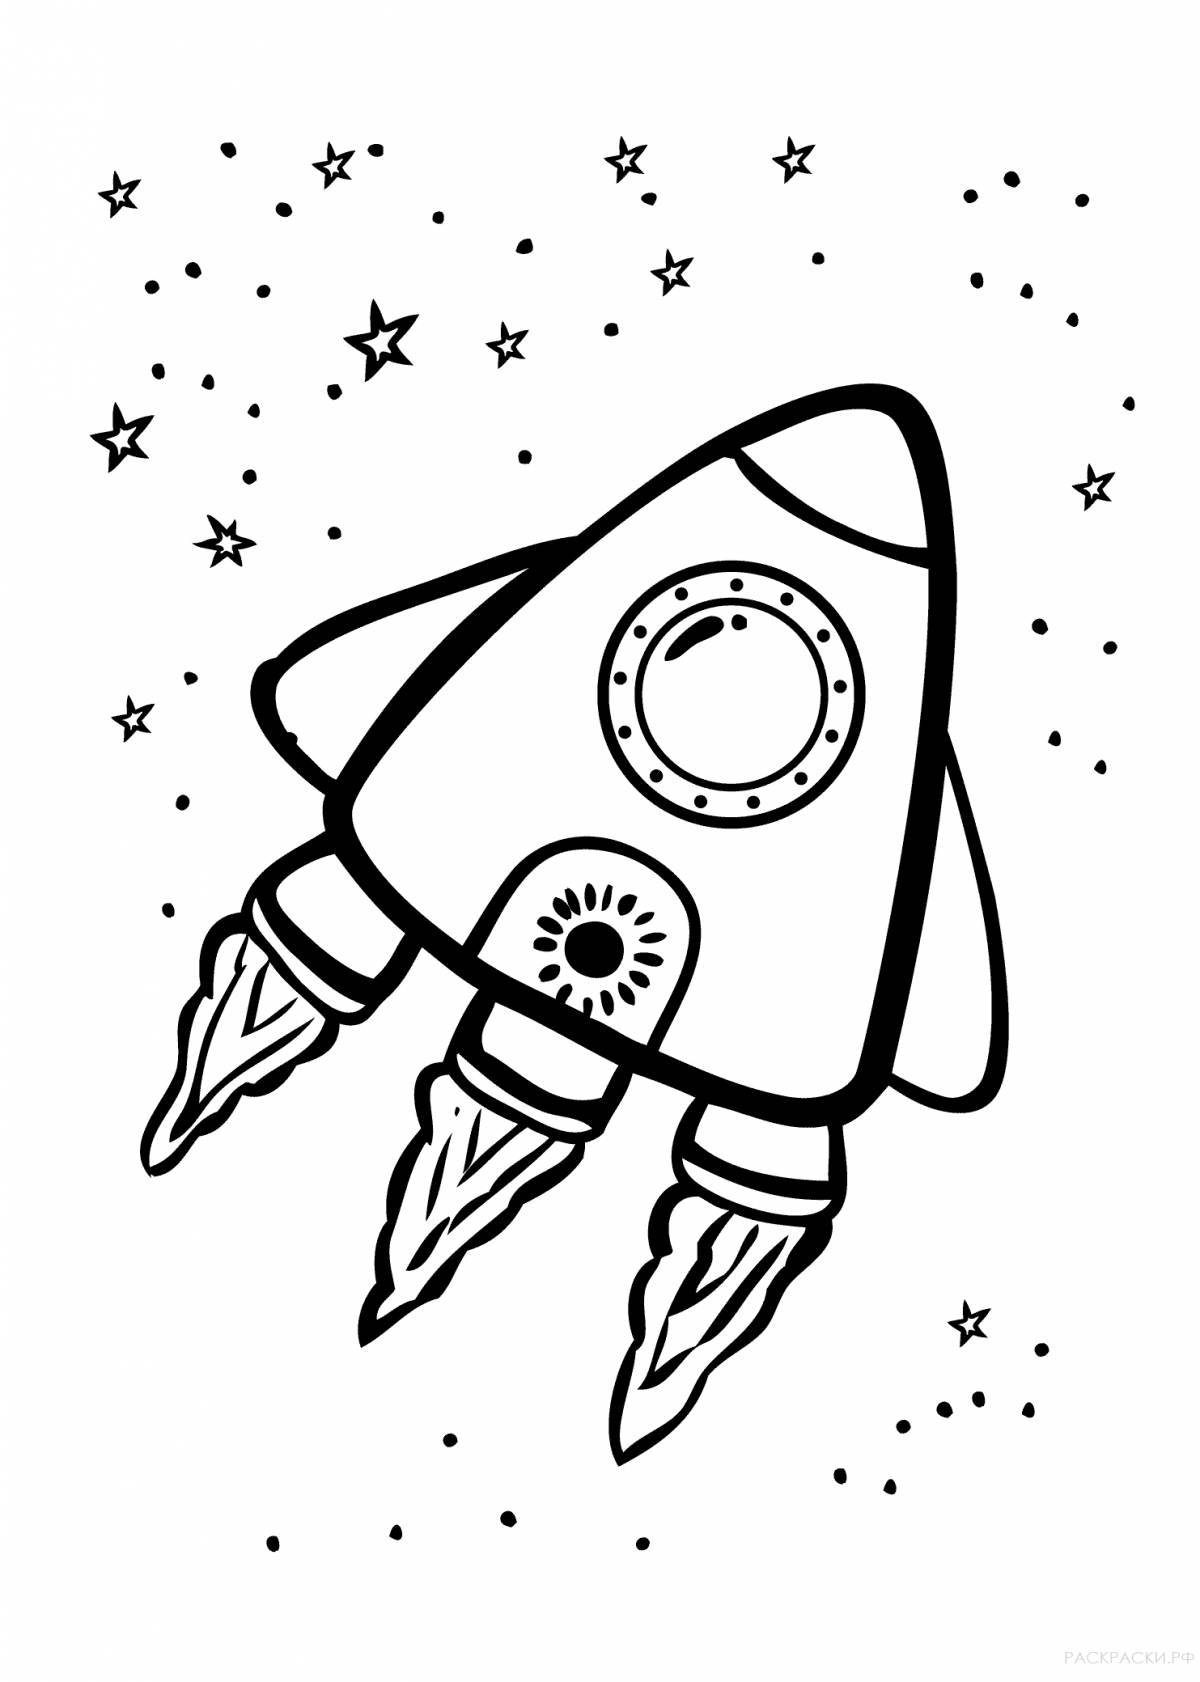 Awesome space coloring book for kids